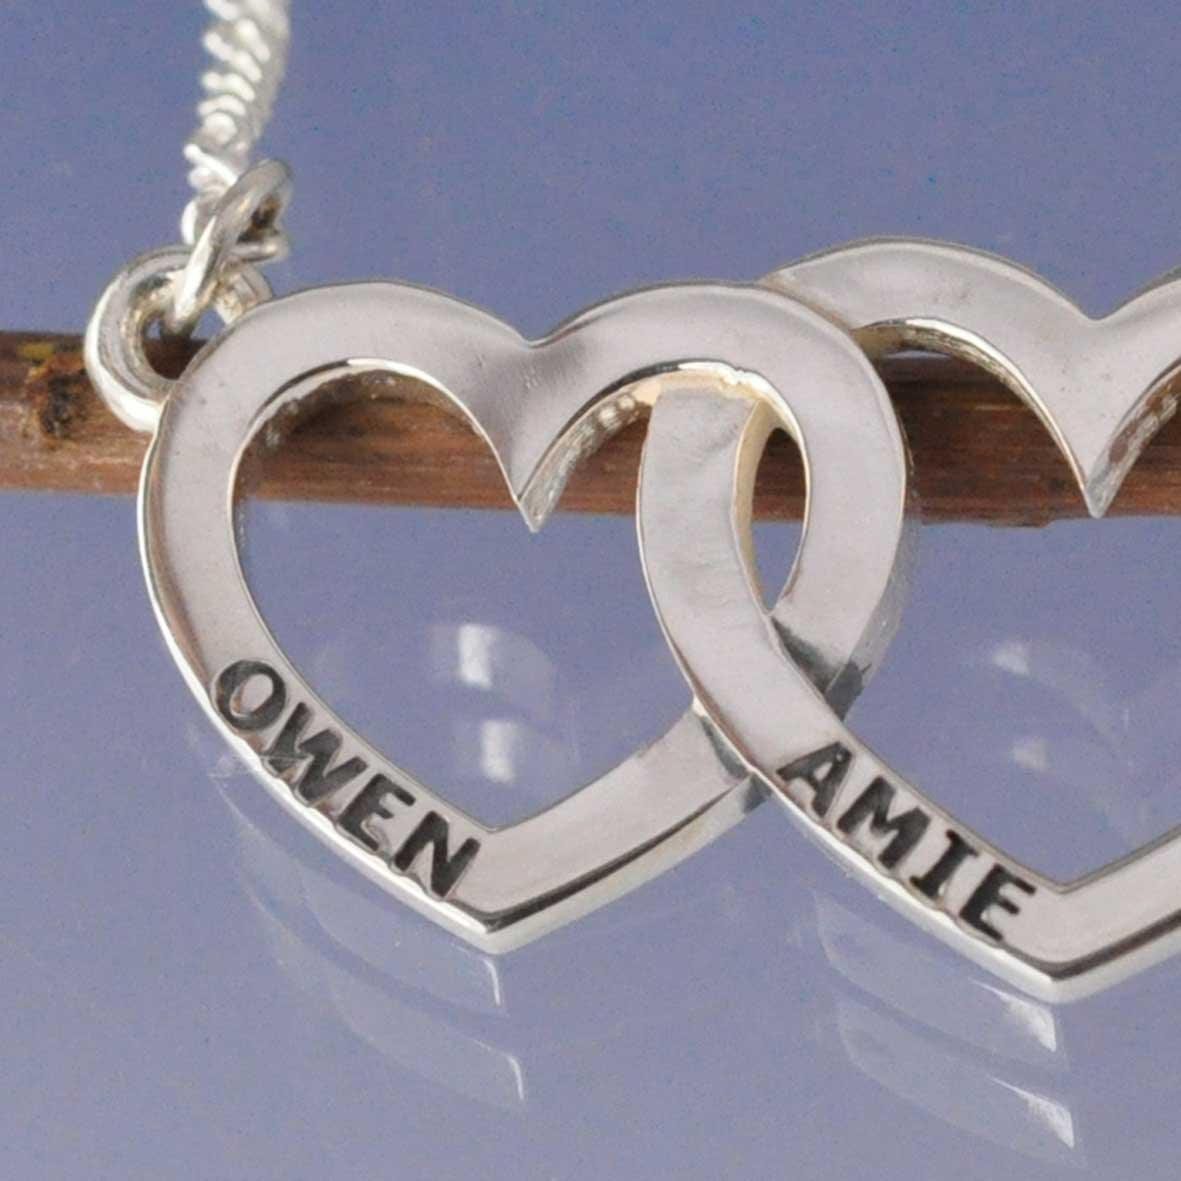 Entwined Personalised Heart Pendant by Chris Parry Jewellery